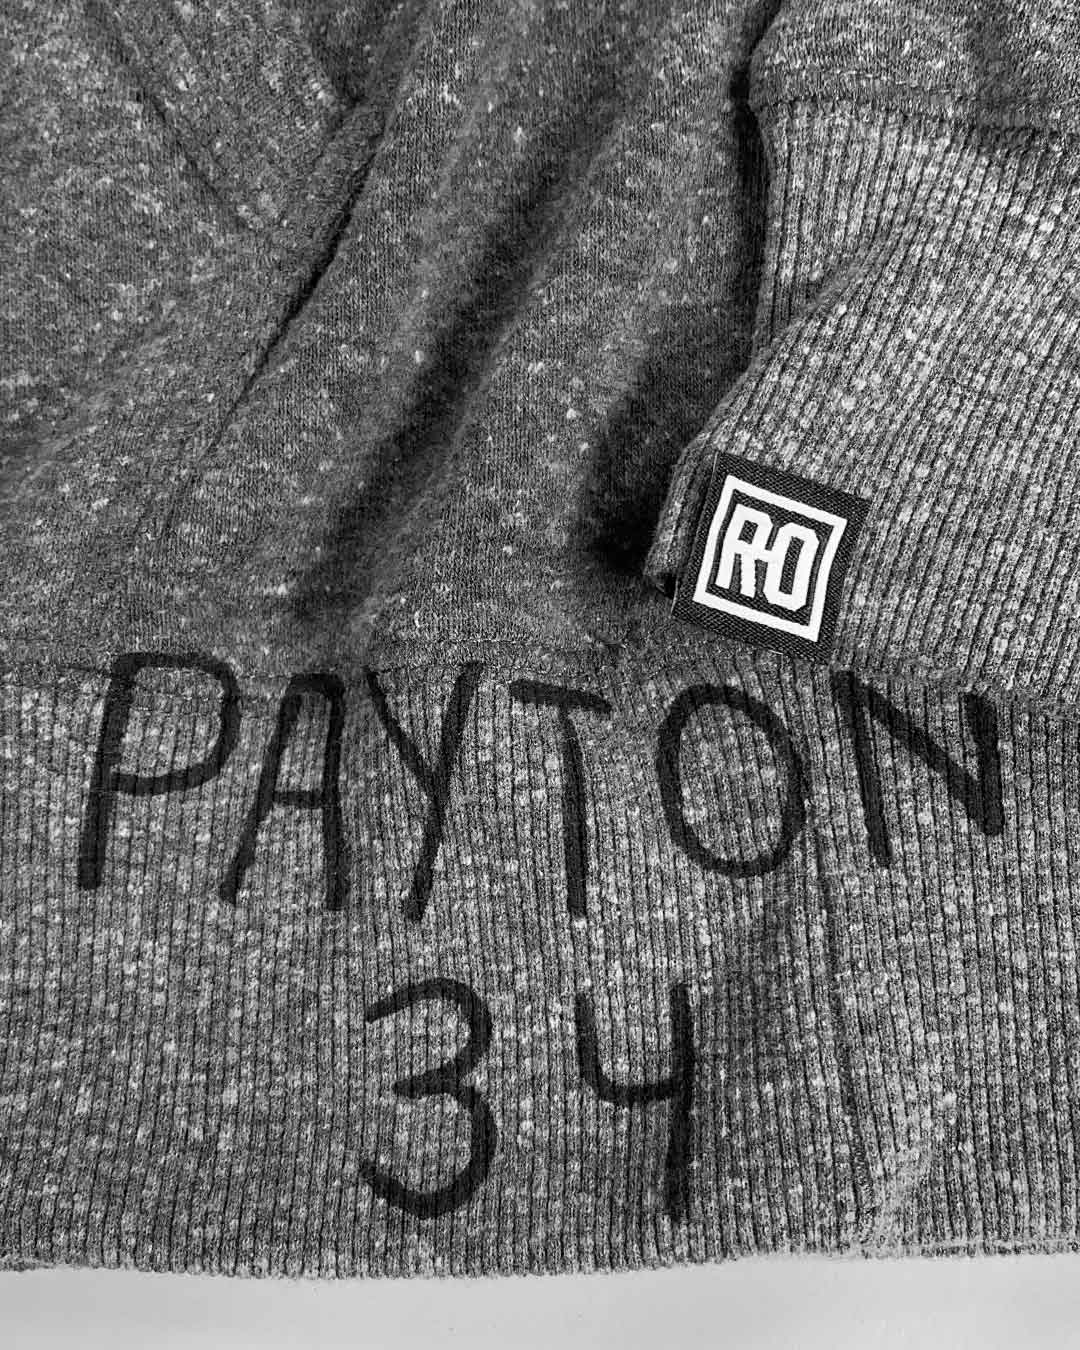 Walter Payton Sweetness Pullover Hoody - Roots of Fight Canada